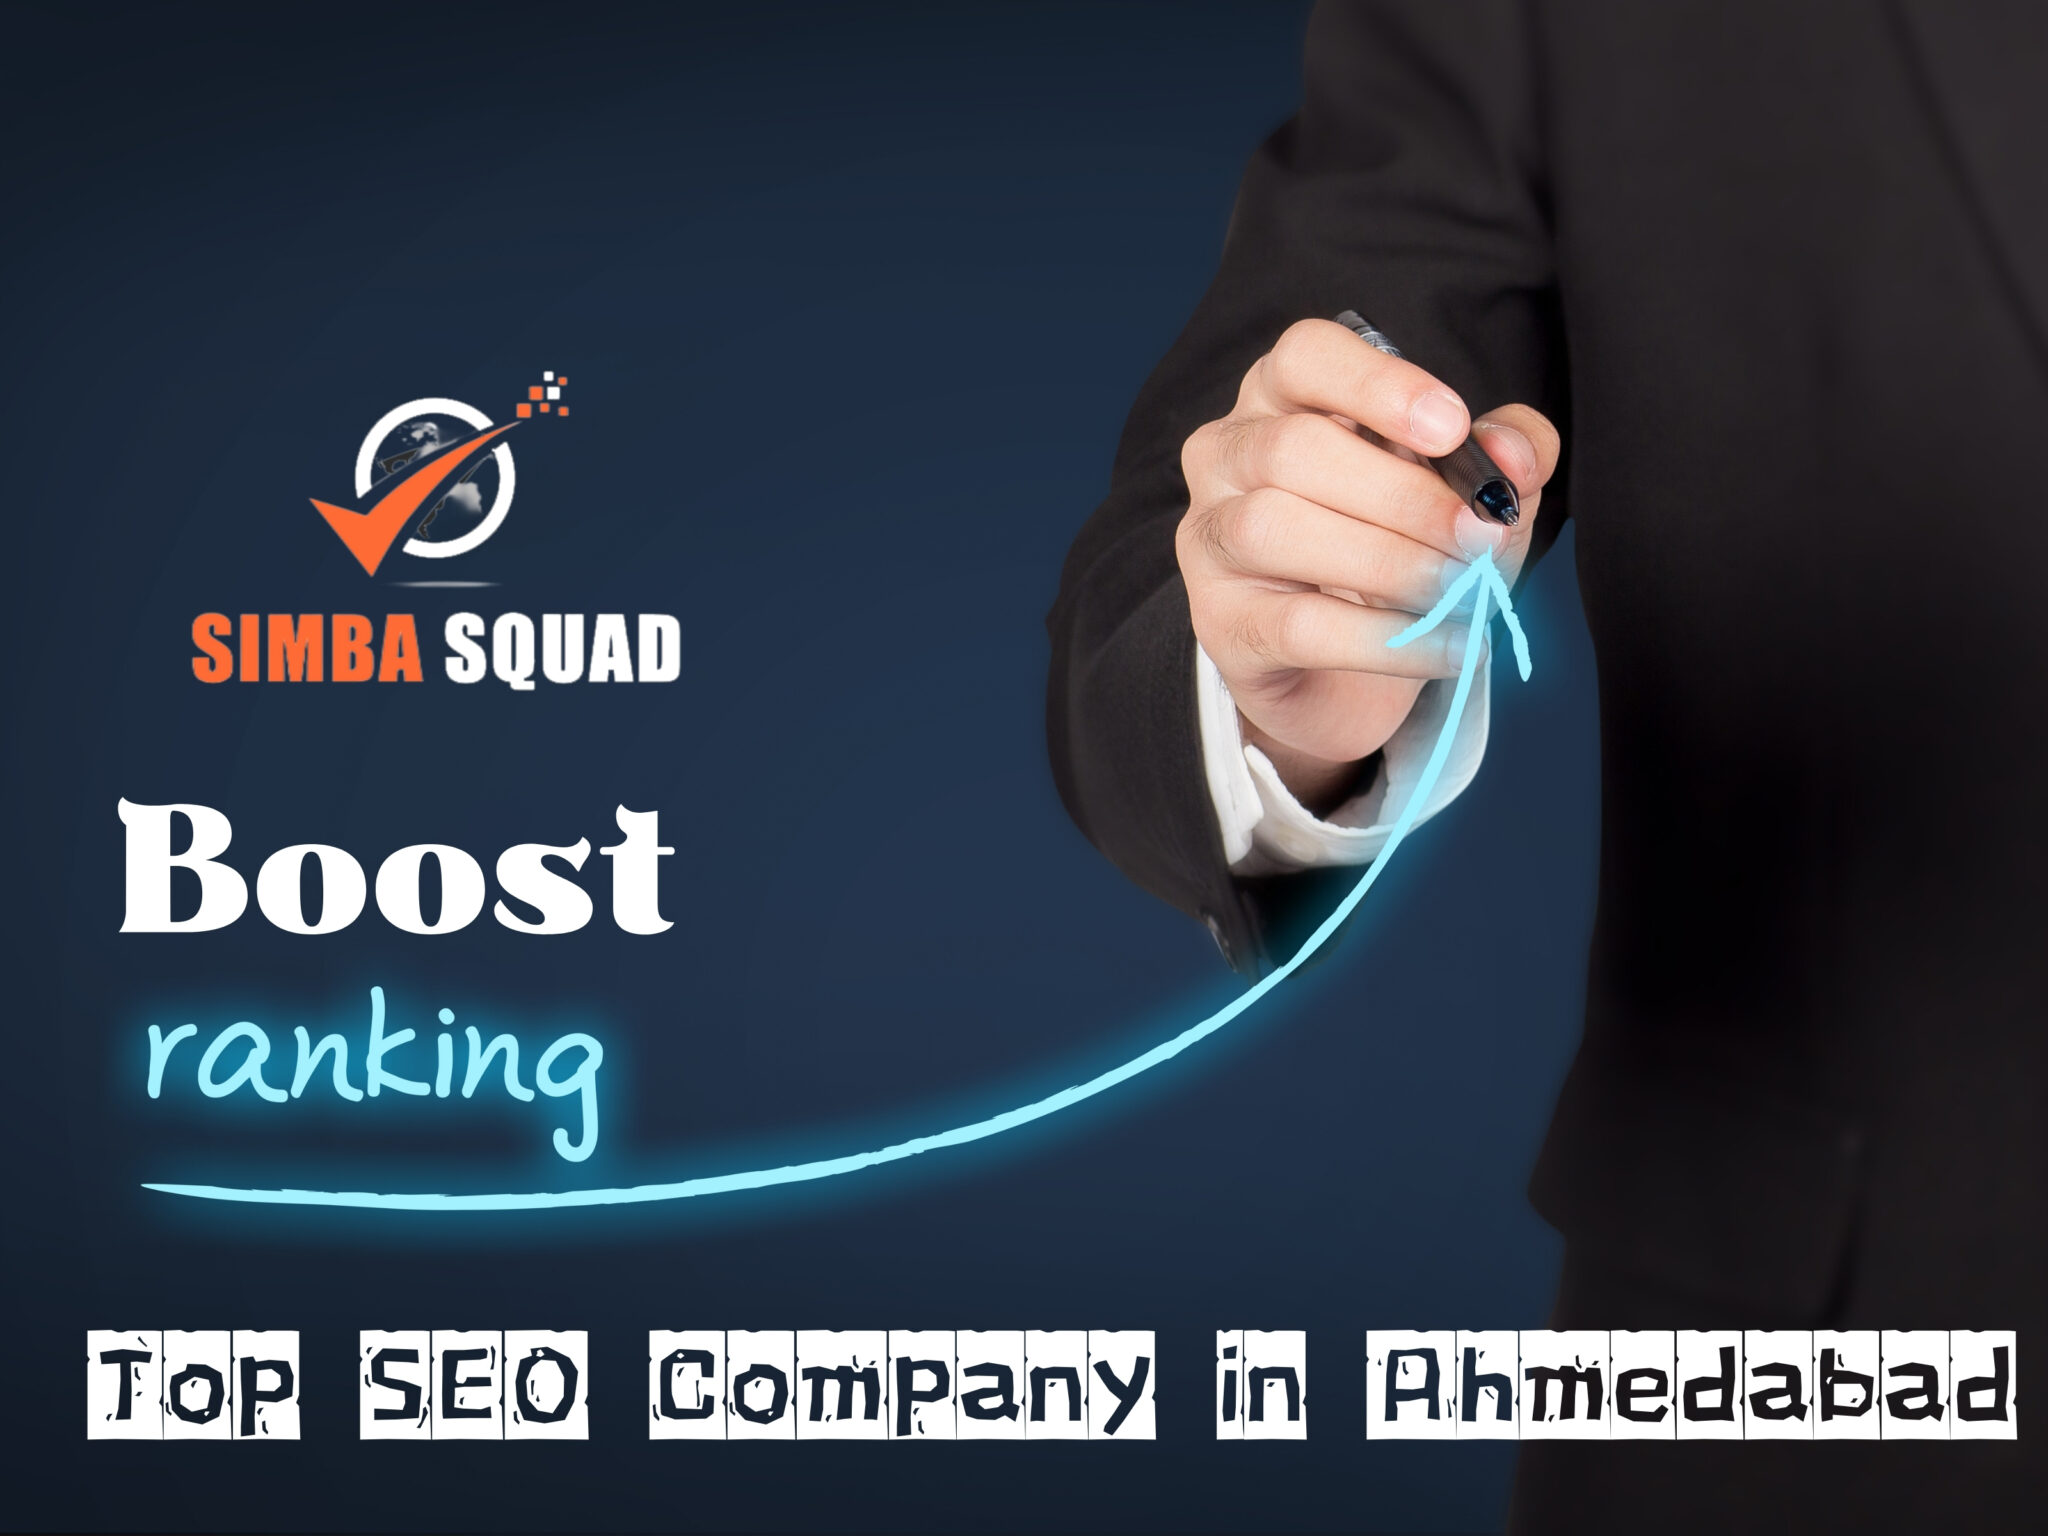 Ahmedabad’s SEO Experts: Simba Squad for Growth